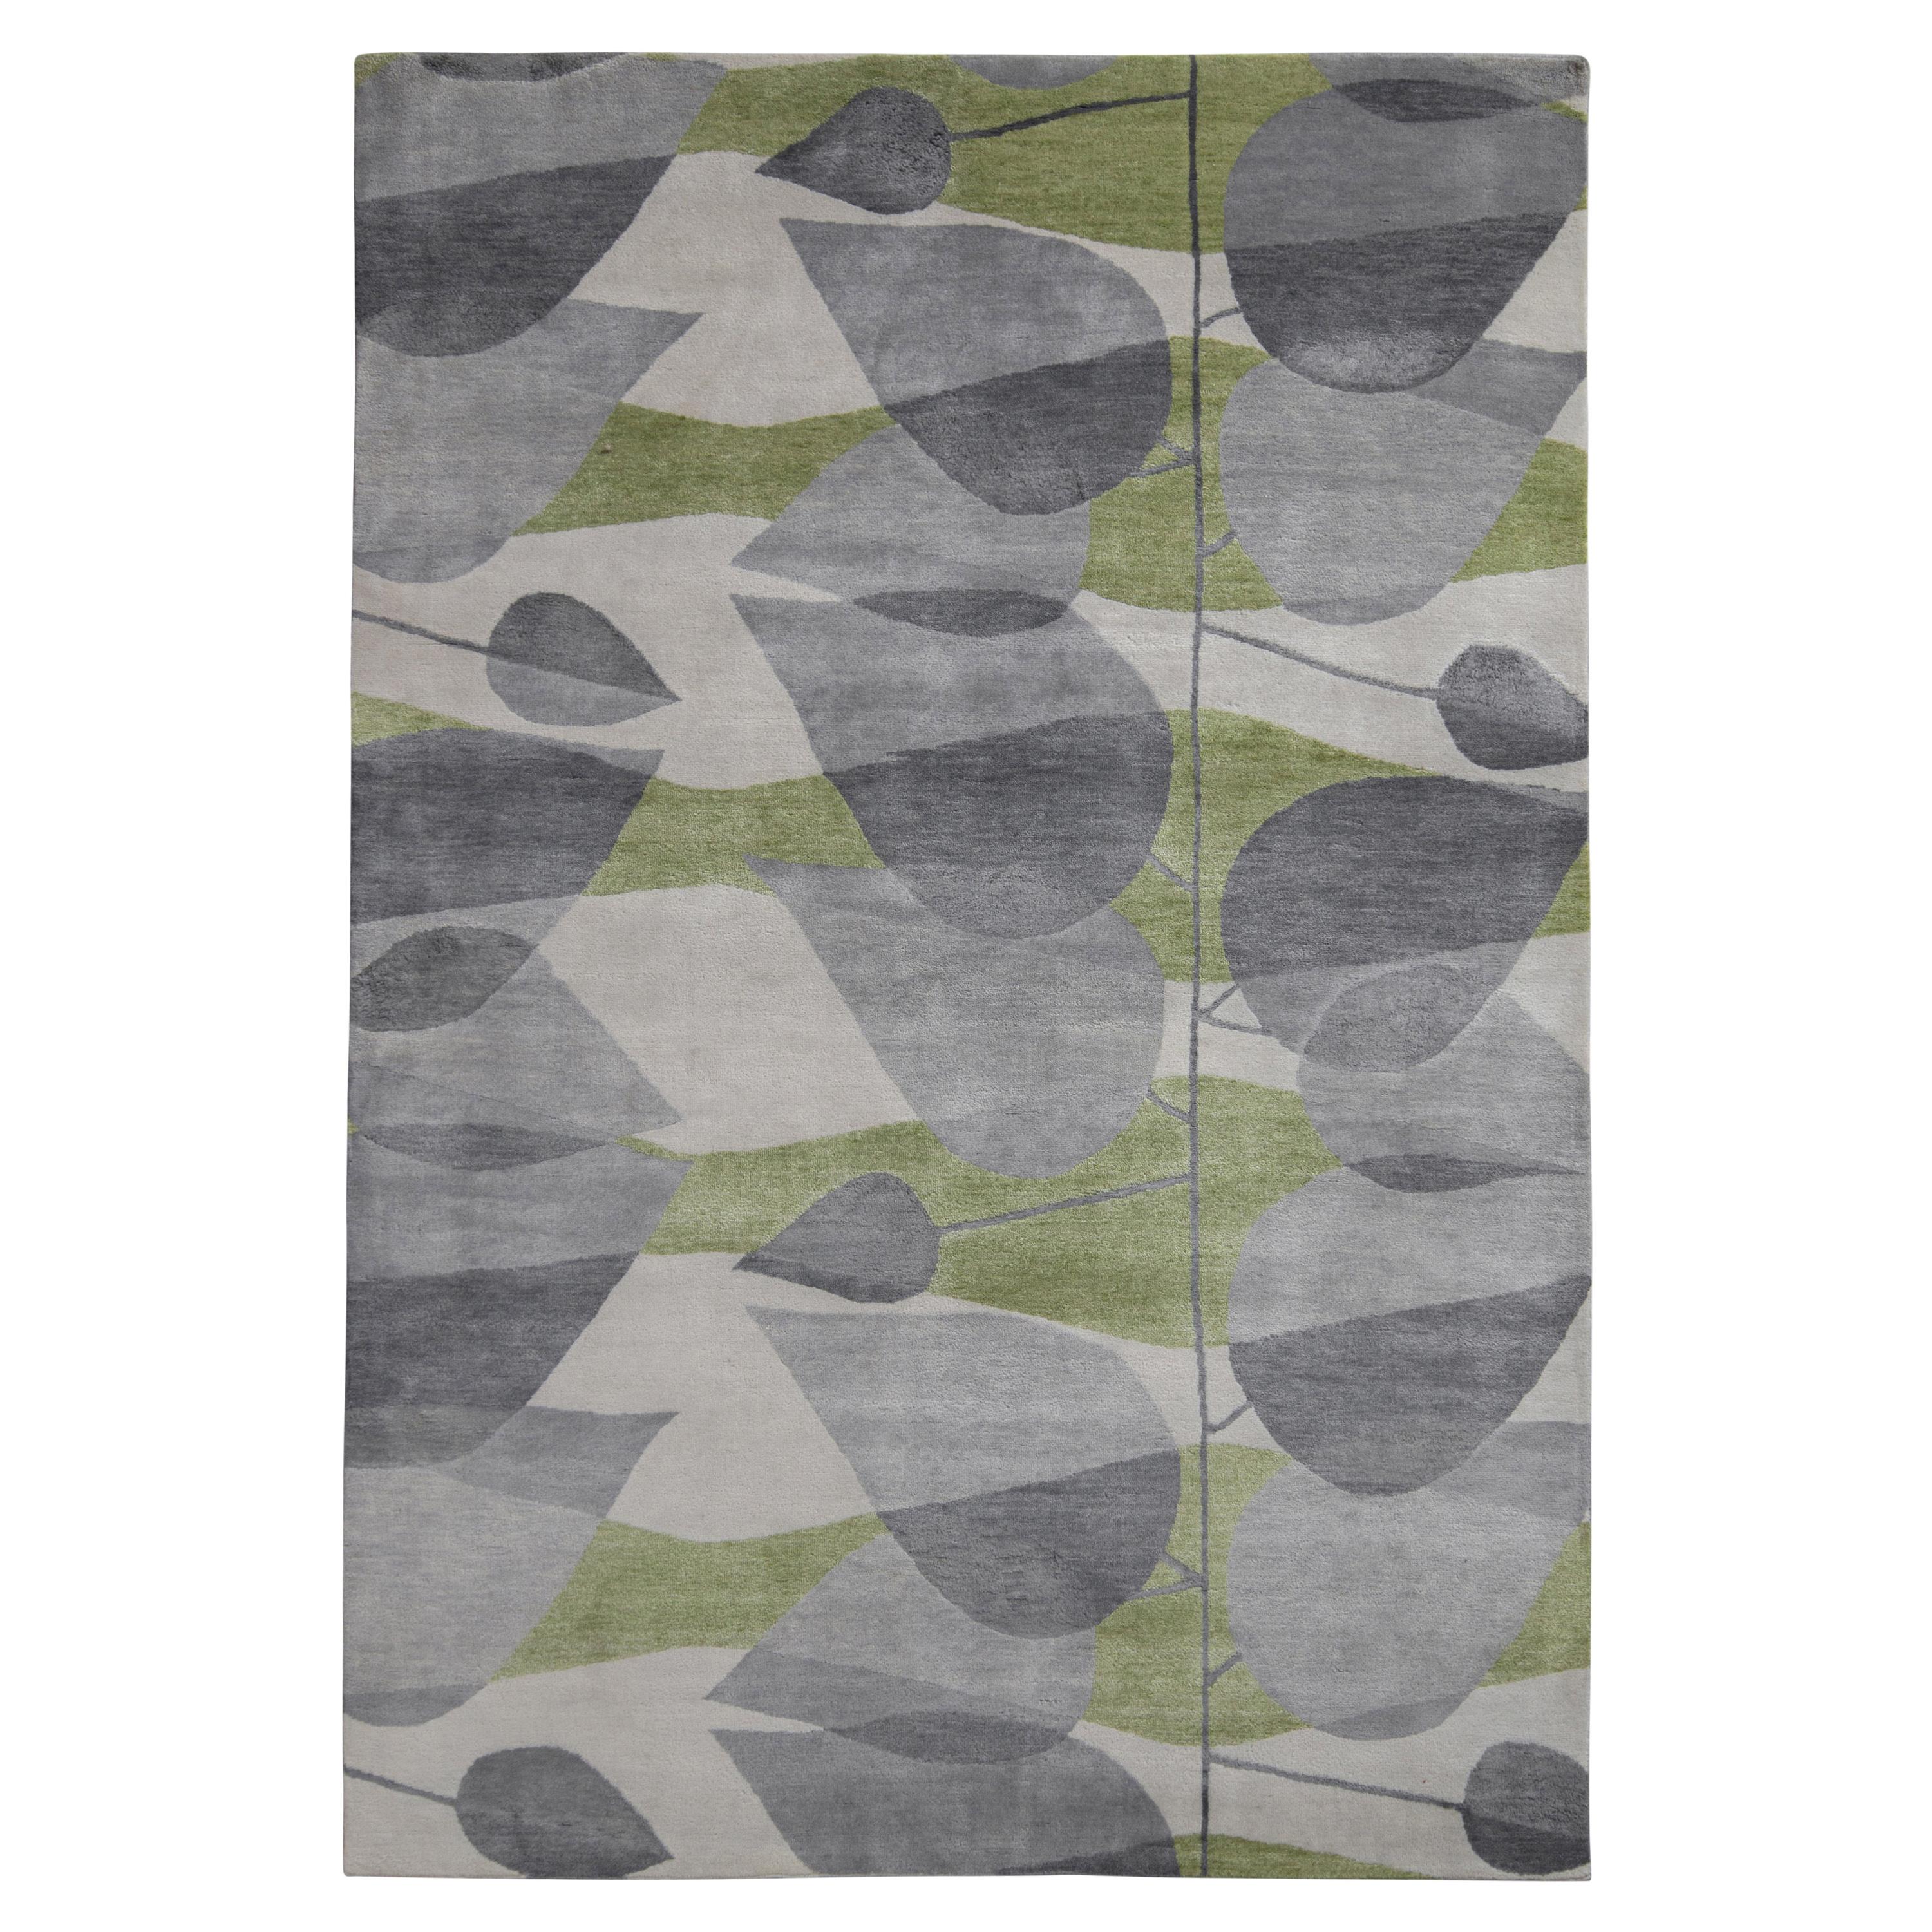 Rug & Kilim’s Mid-Century Modern Style Rug in Gray and Green All Over Pattern